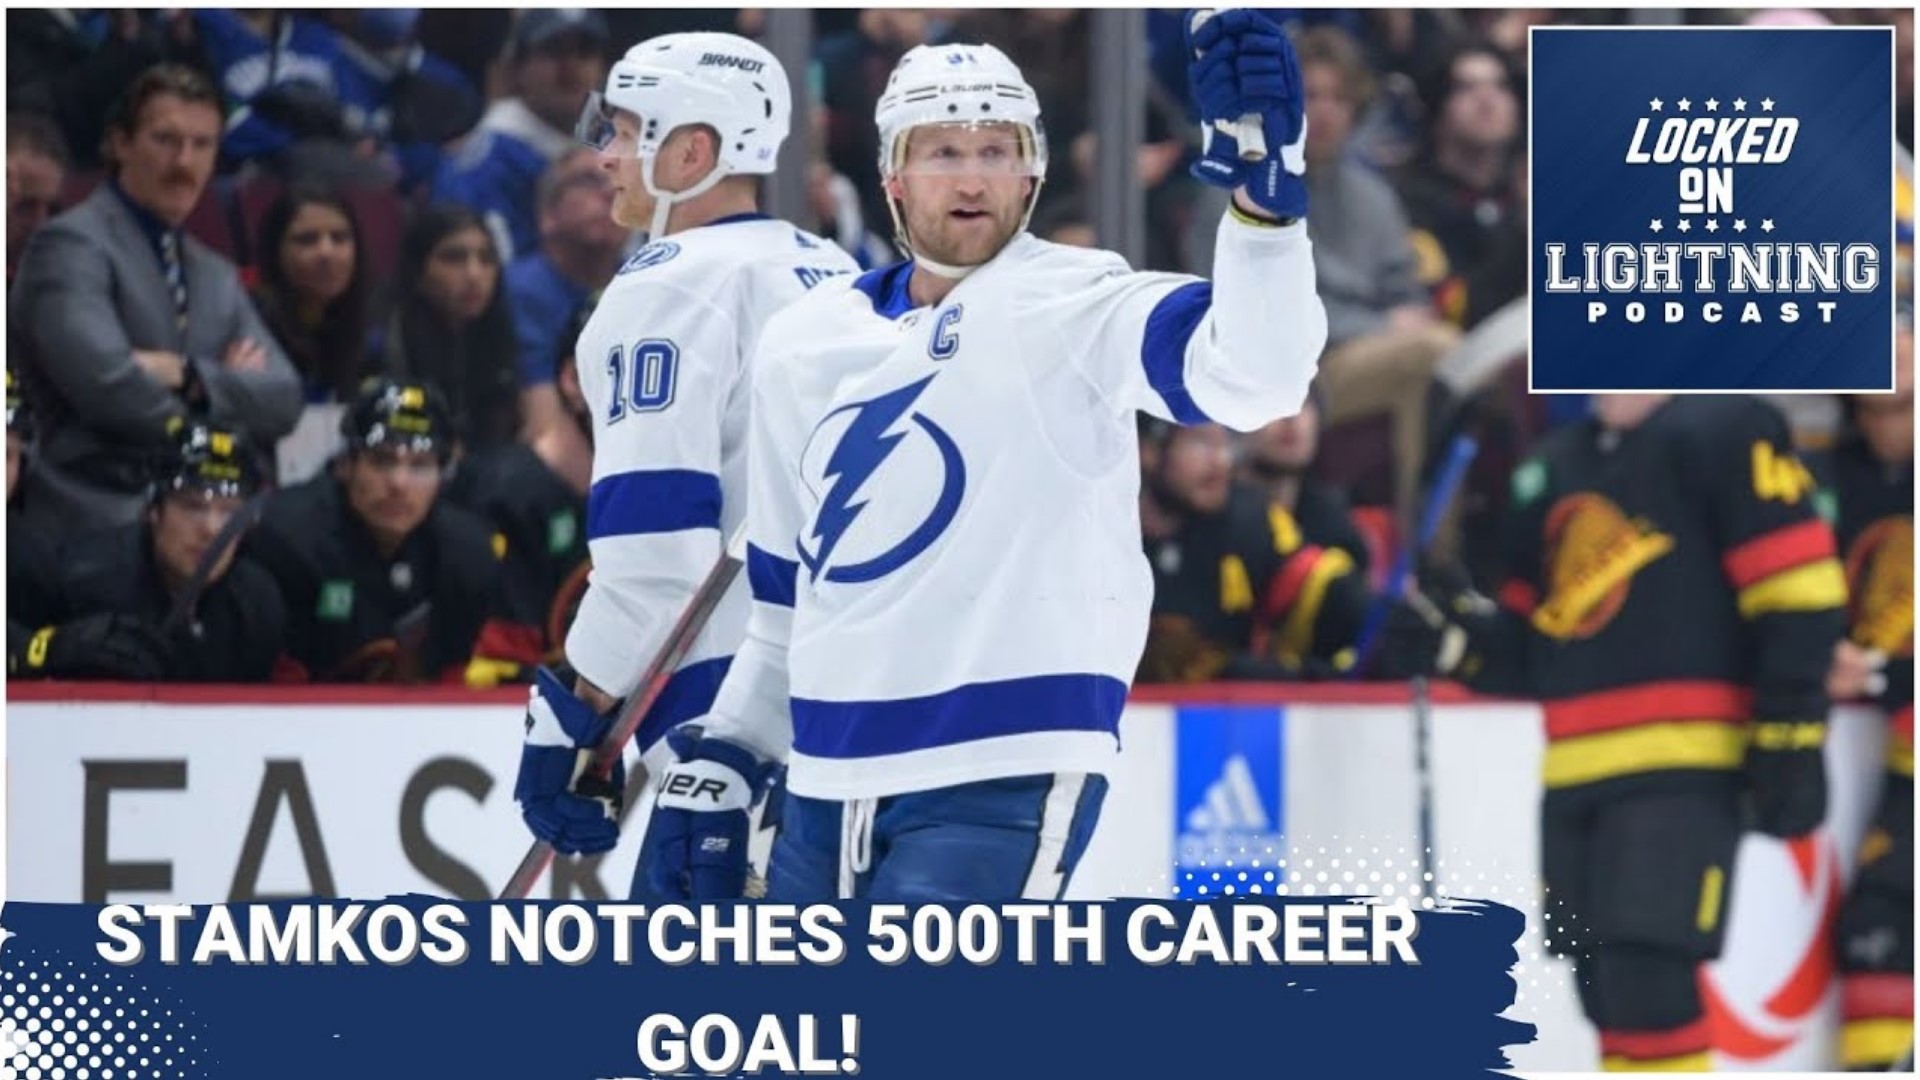 We all witnessed history Wednesday night in Vancouver with Steven Stamkos scoring his 500th career goal.